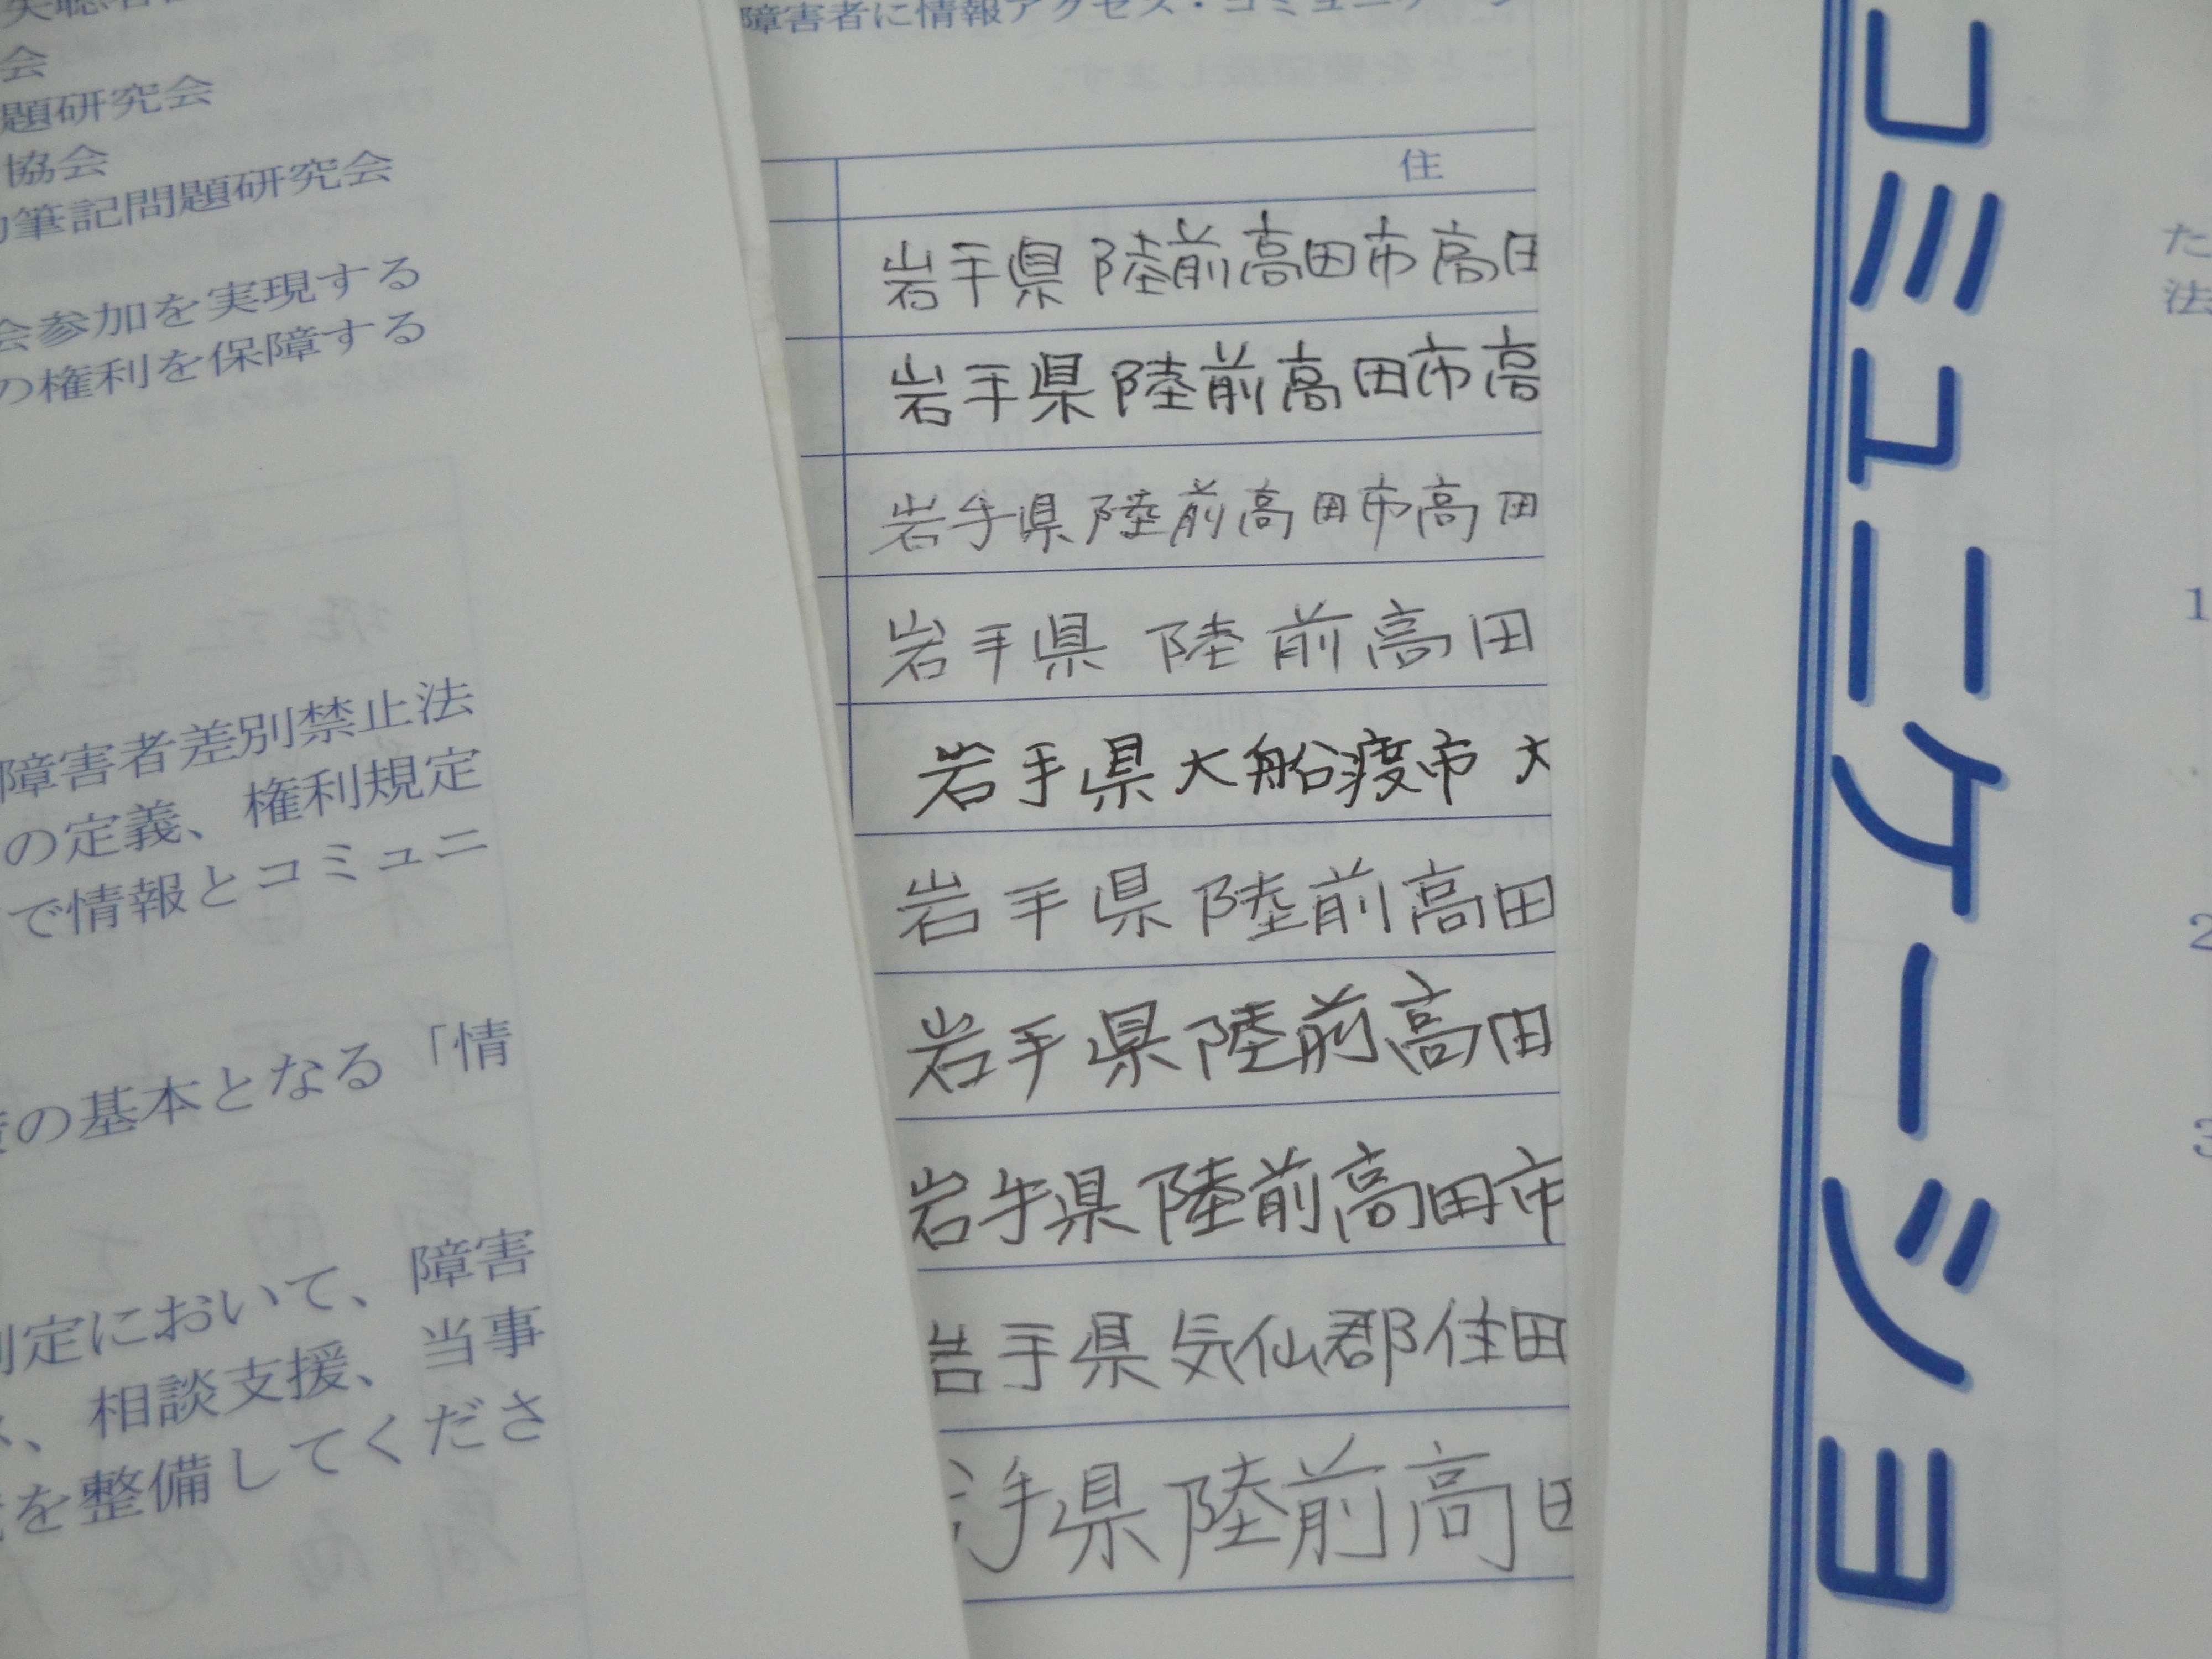 Signatures by deaf people affected by the disaster.